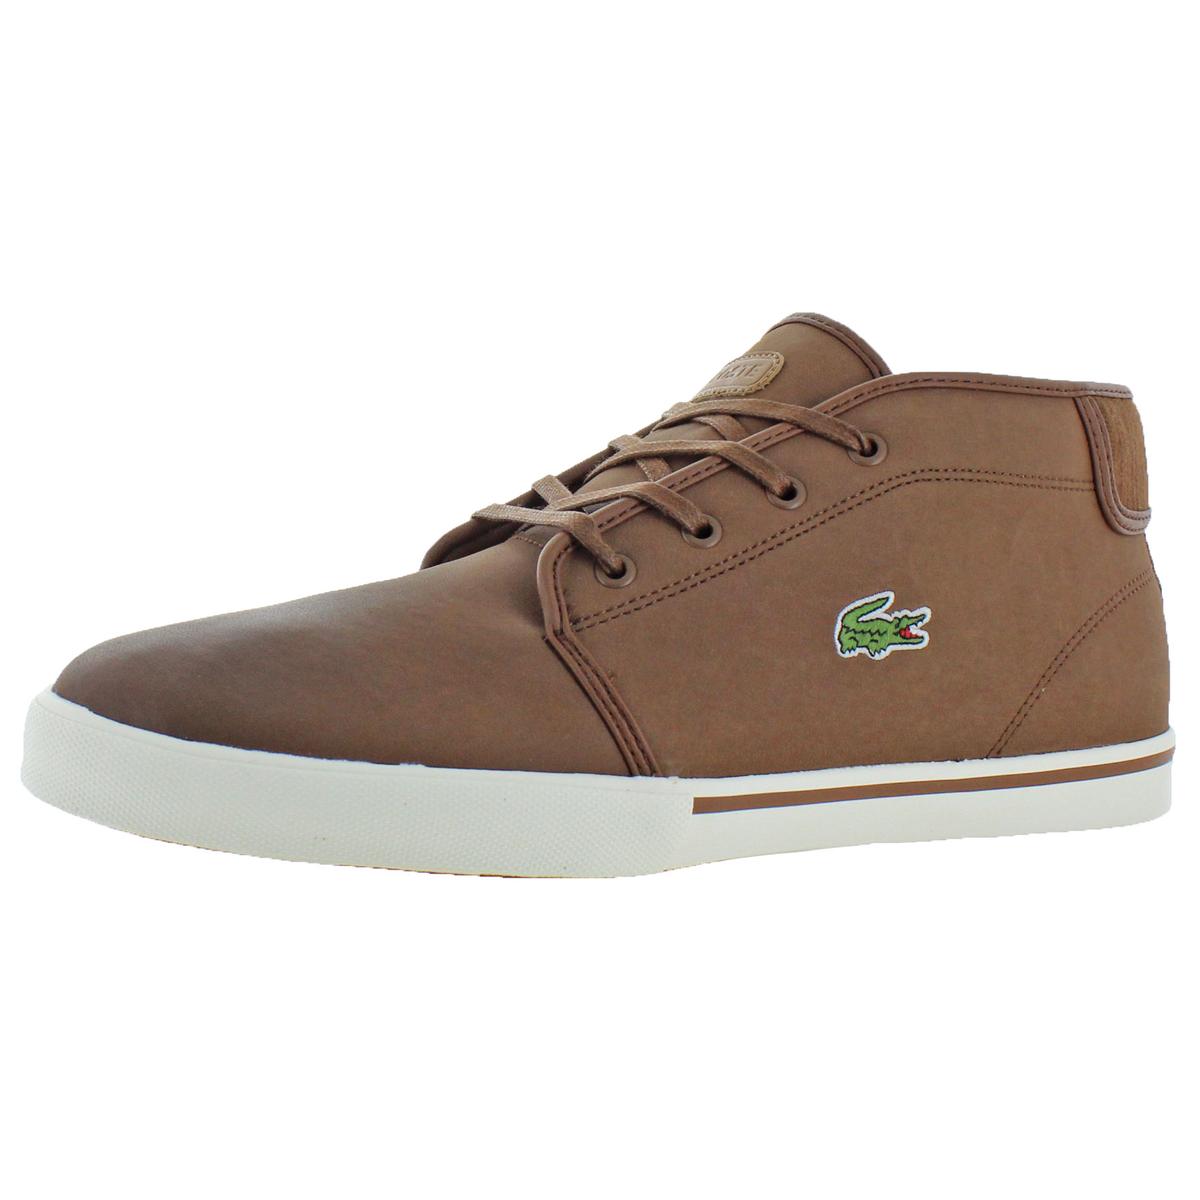 Lacoste Men's Ampthill Leather Chukka Mid-Top Fashion Sneakers Shoes ...